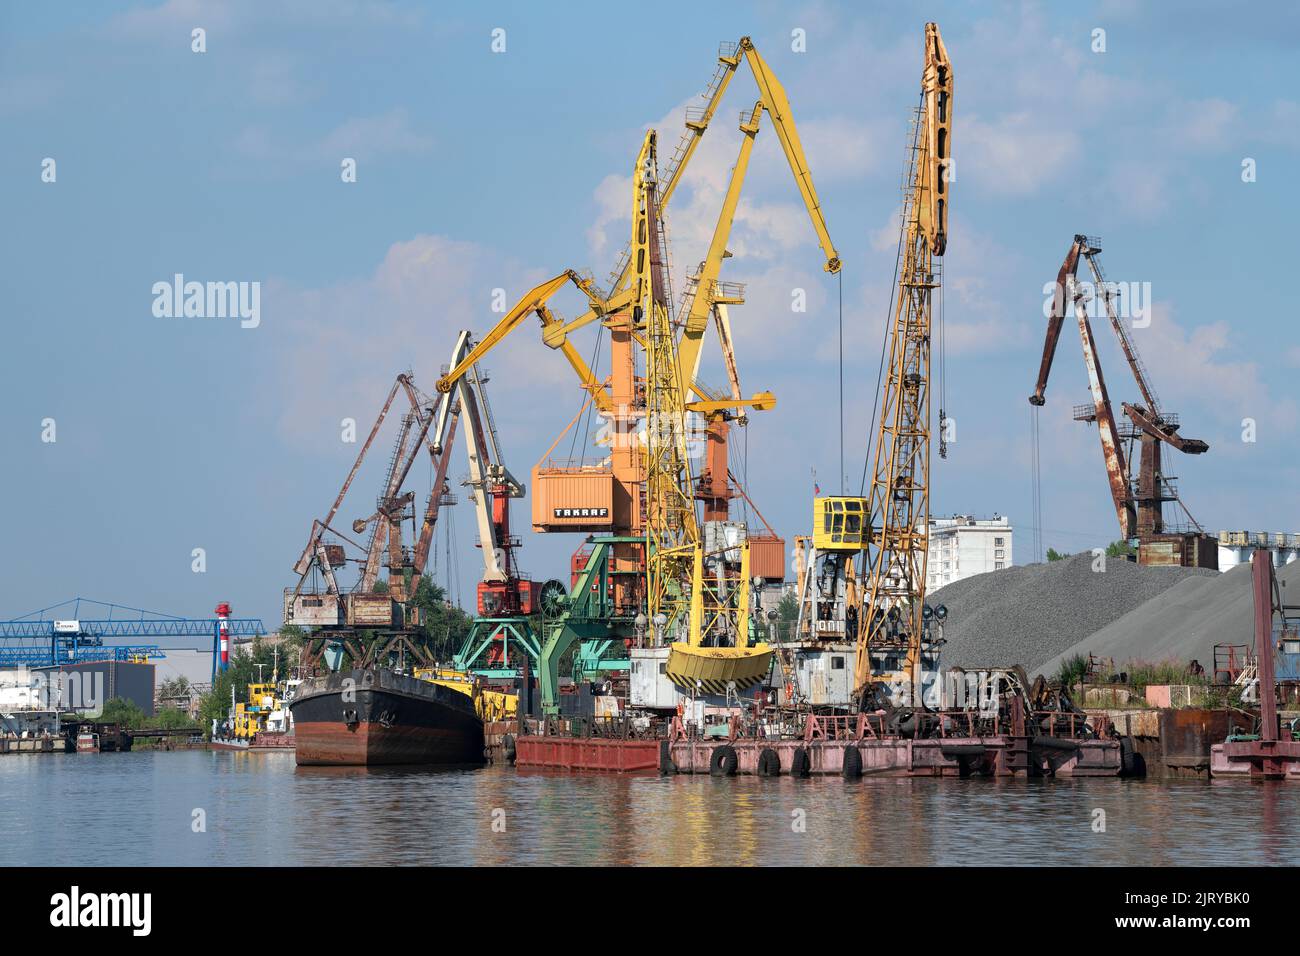 CHEREPOVETS, RUSSIA - AUGUST 04, 2022: Cranes of the Cherepovets river port on a sunny August day Stock Photo